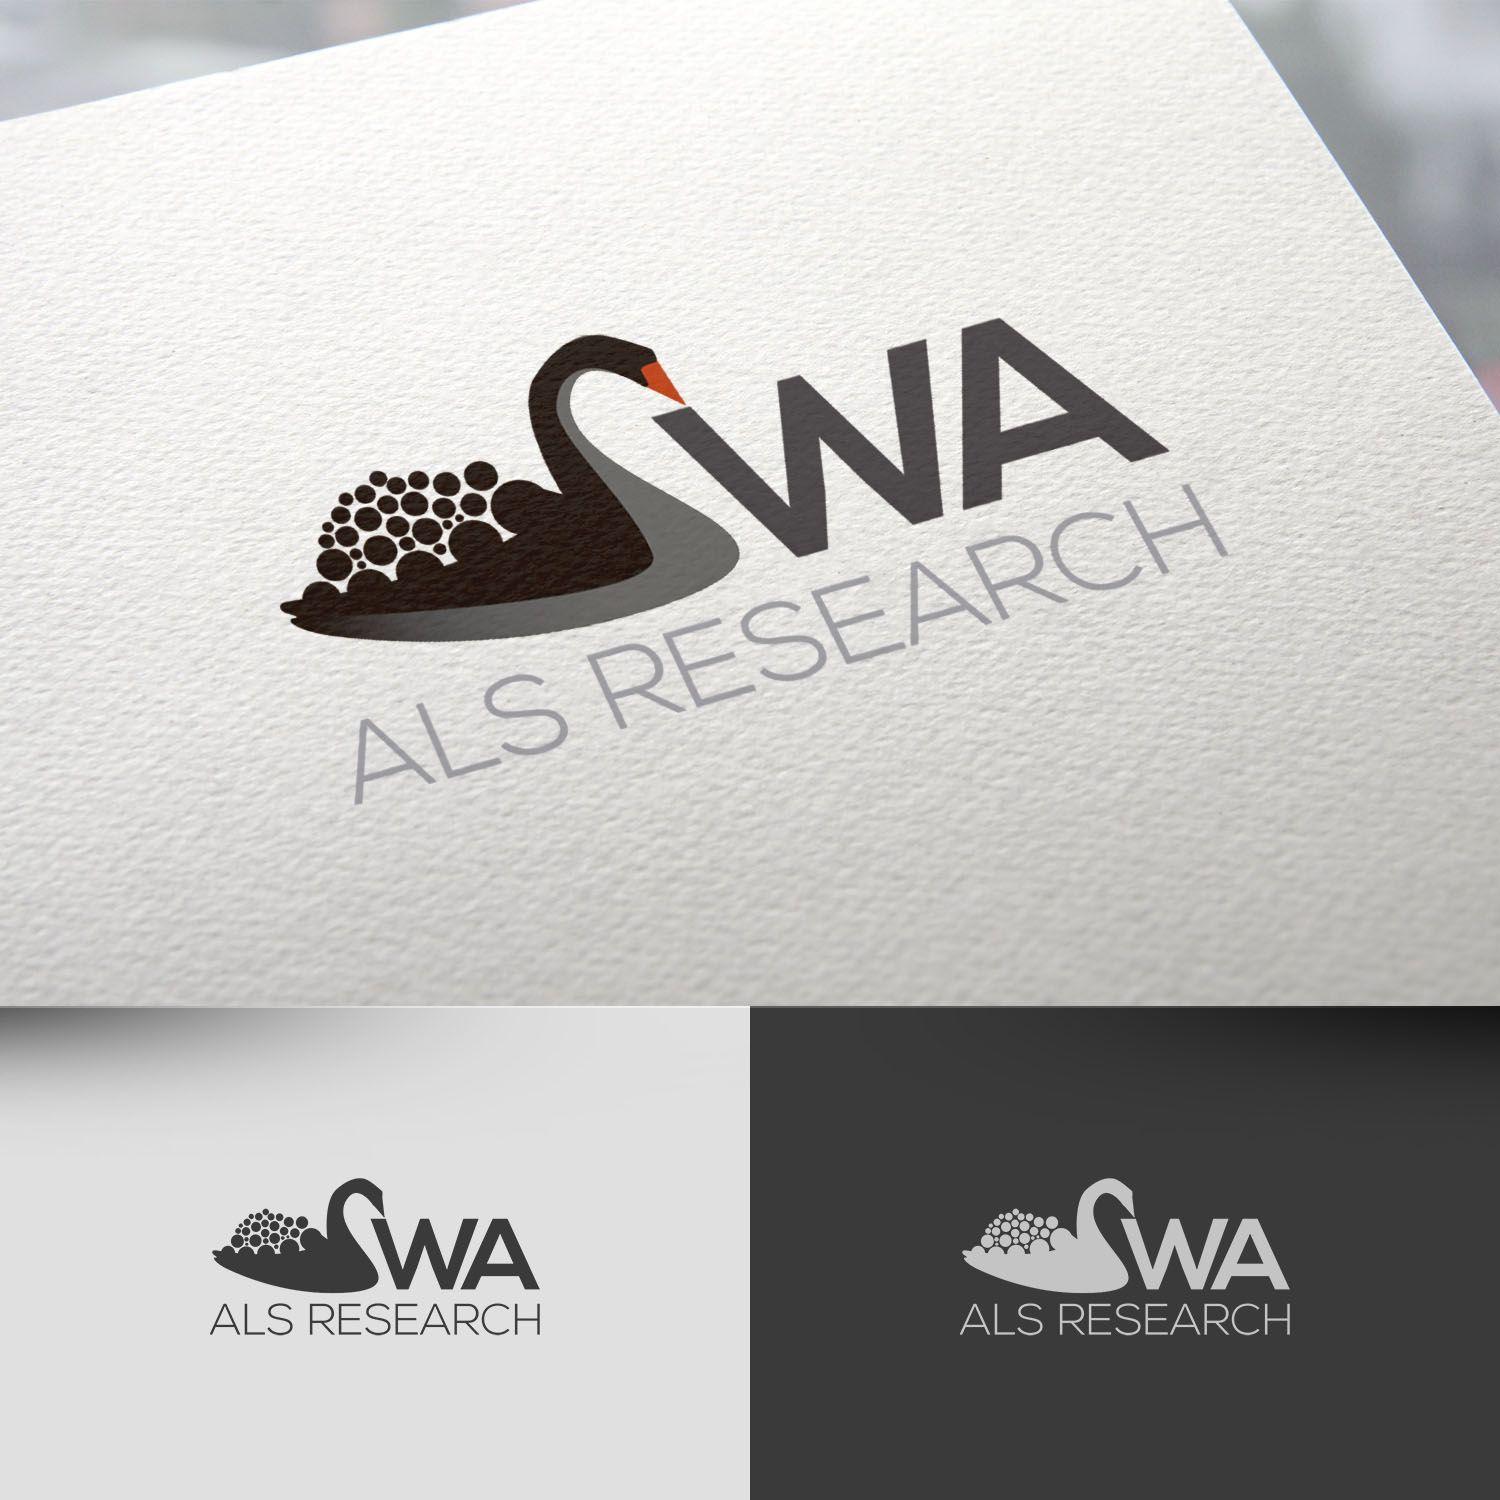 Black Swan Company Logo - Professional, Serious, Pharmaceutical Logo Design for Open but